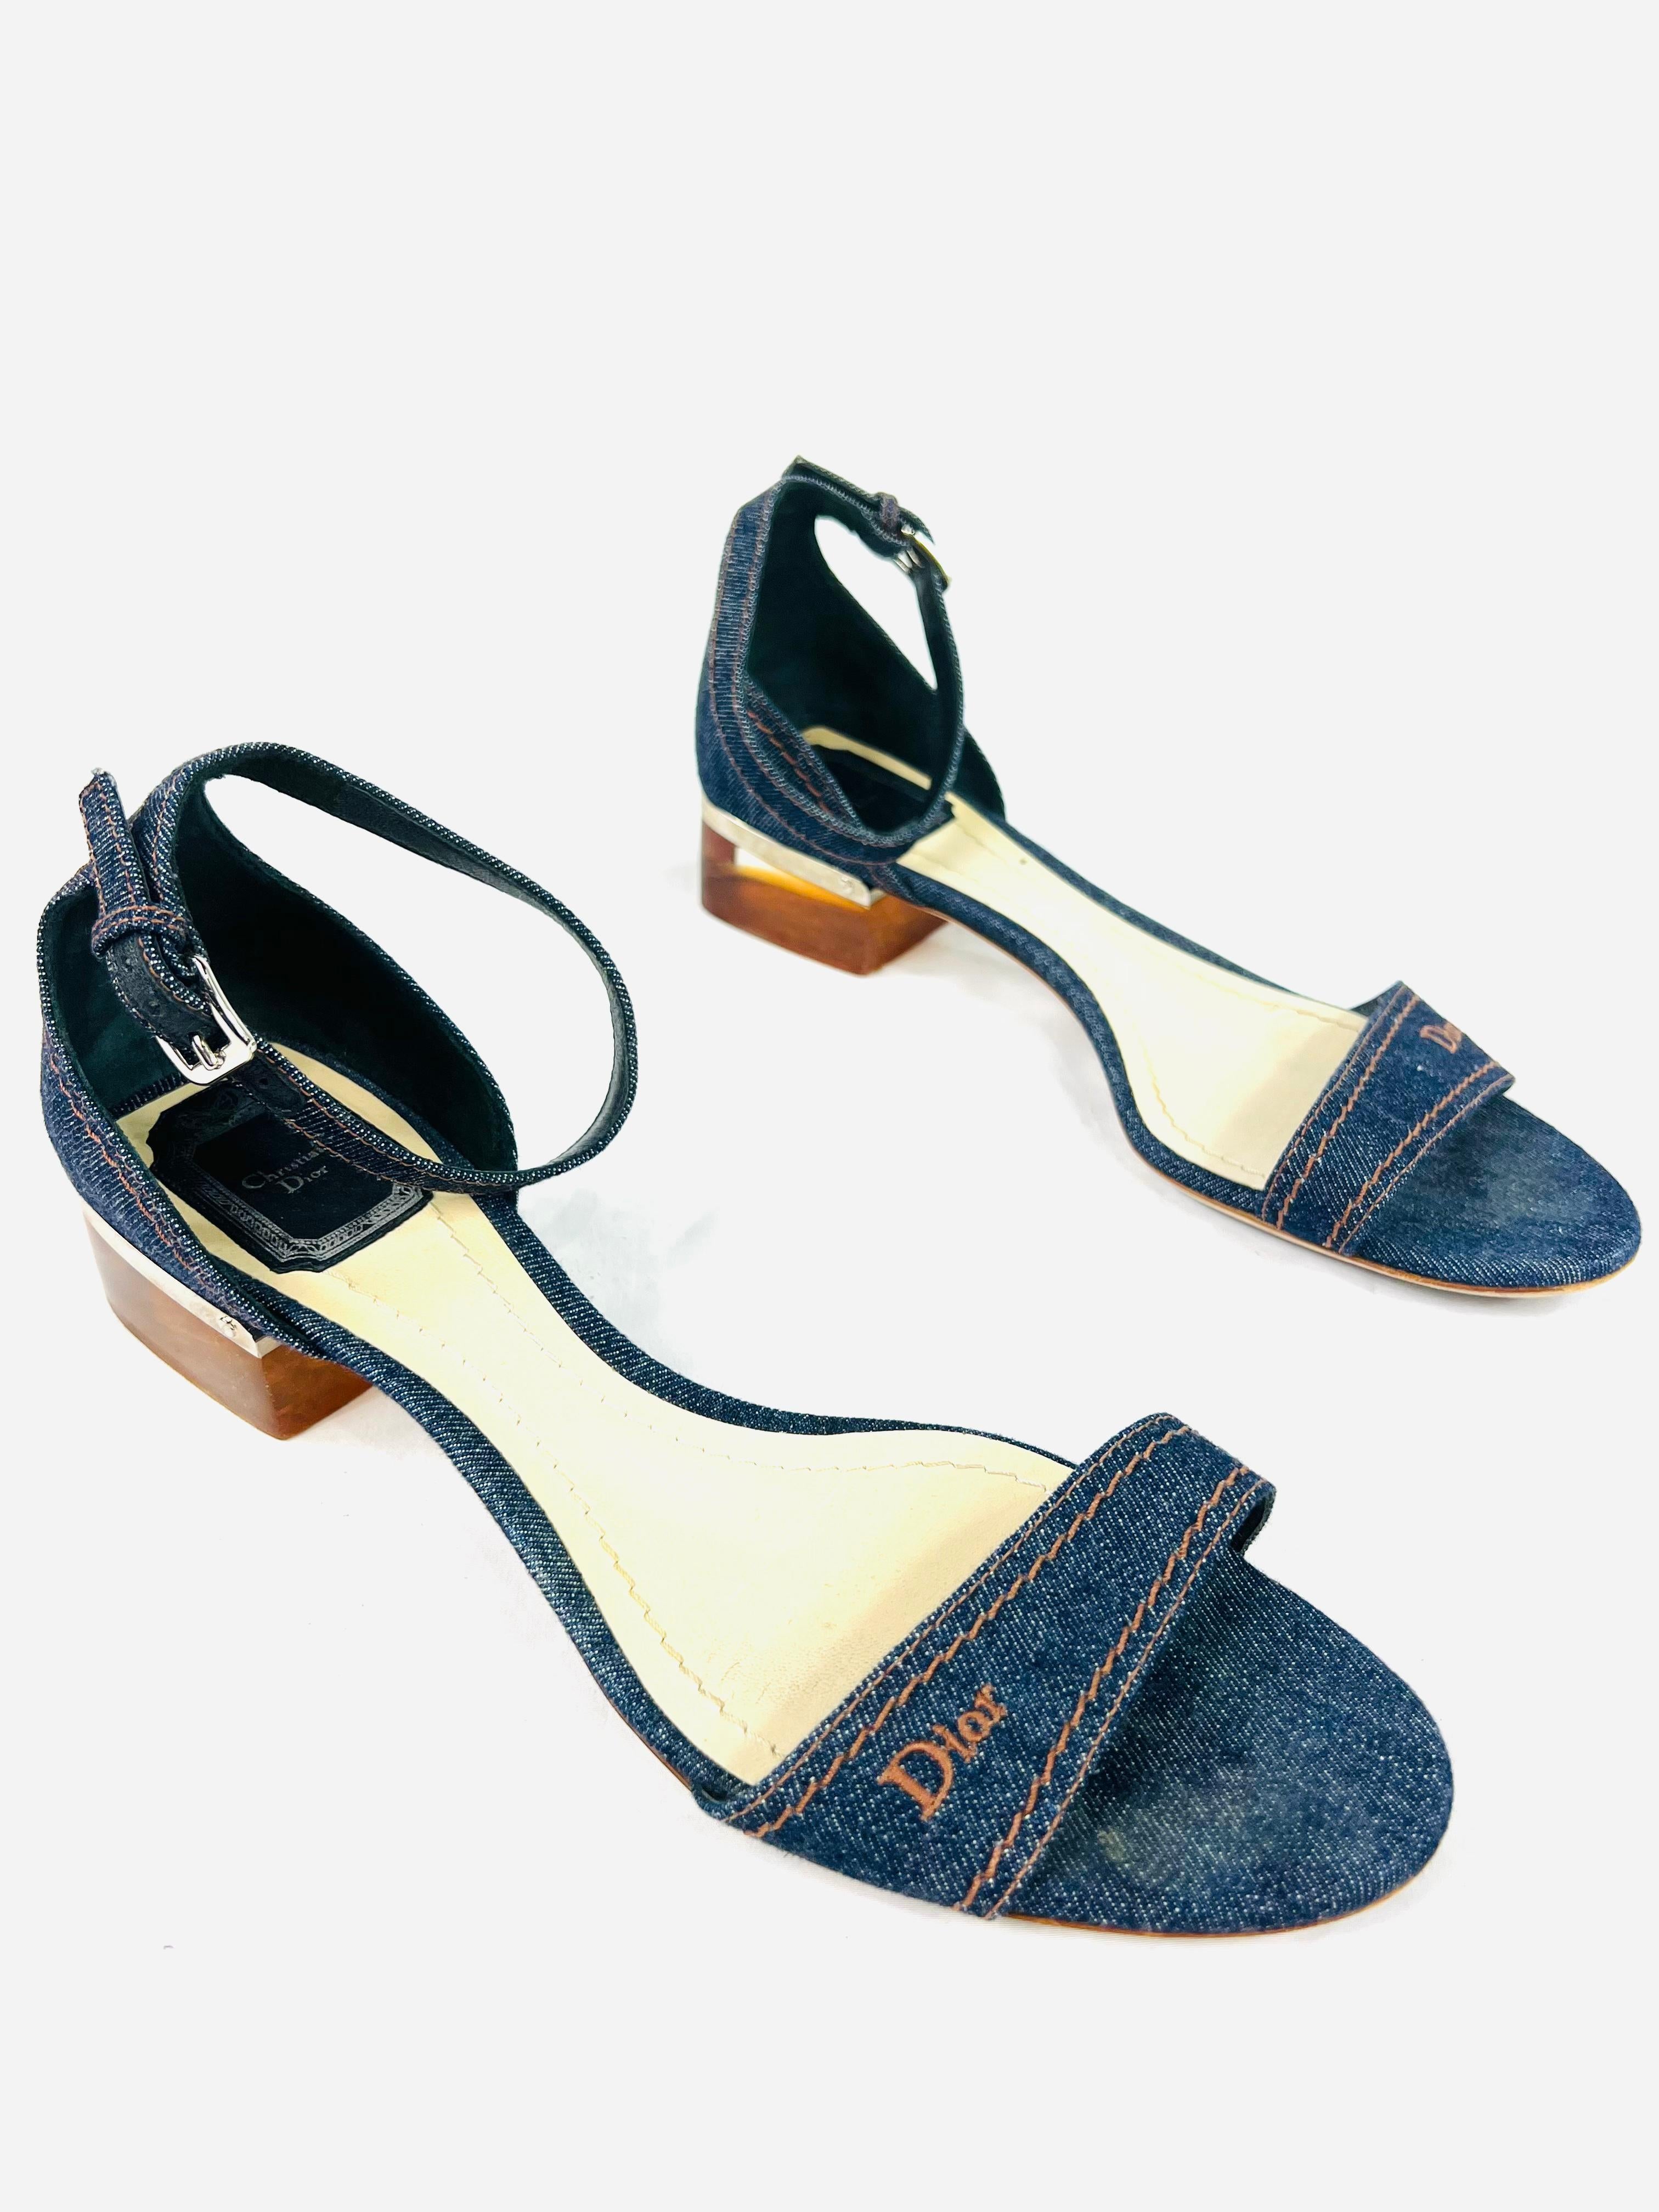 Product details:

The shoes are made out of dark wash denim with brown acrylic heel, that is 1.5” high and silver tone adjustable buckle closure.